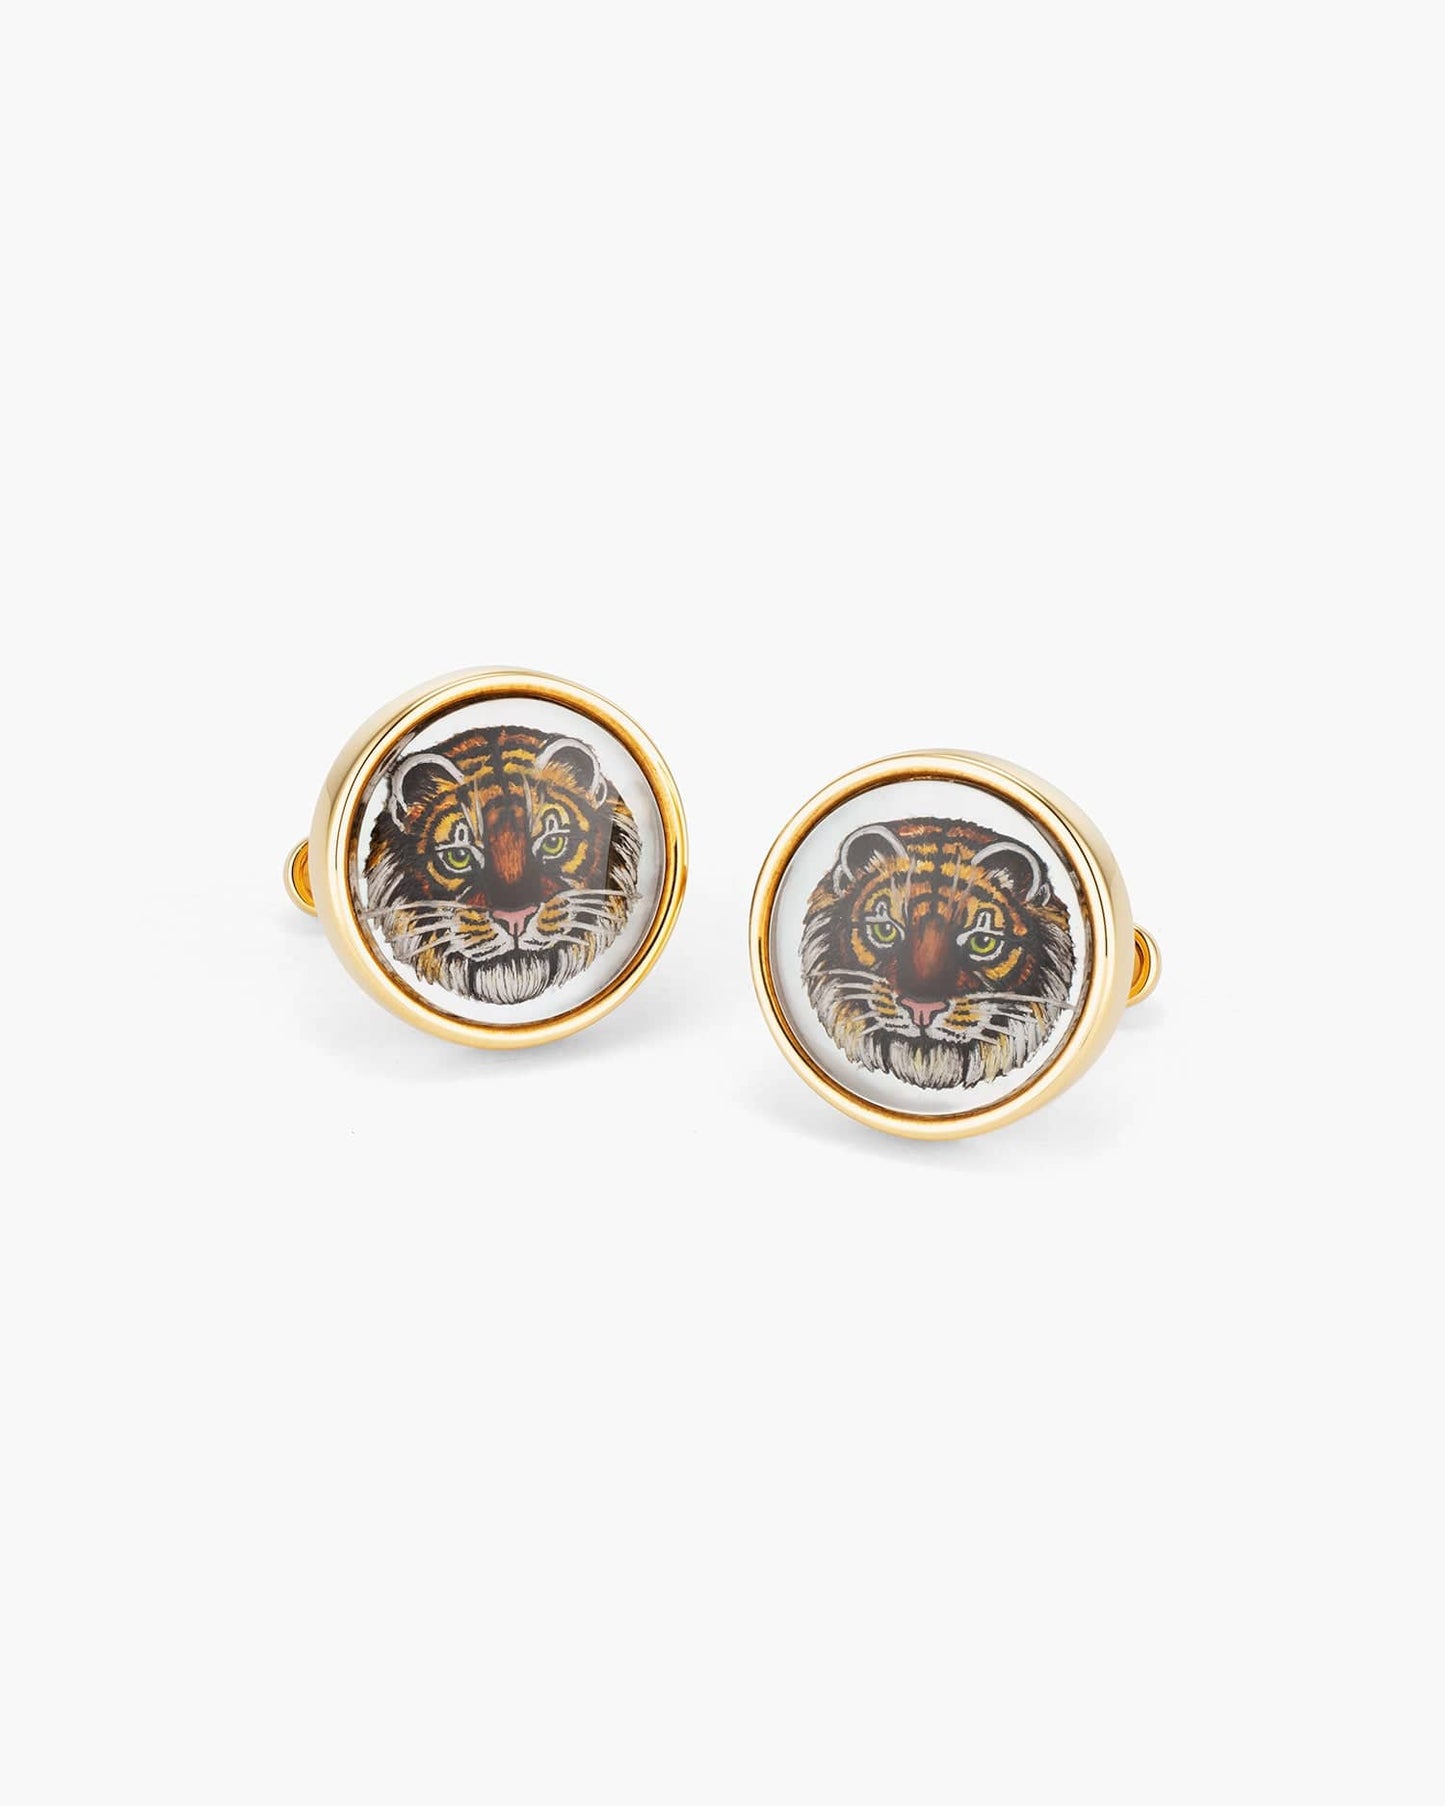 Mother of Pearl and Crystal Hand Painted Tiger Cufflinks